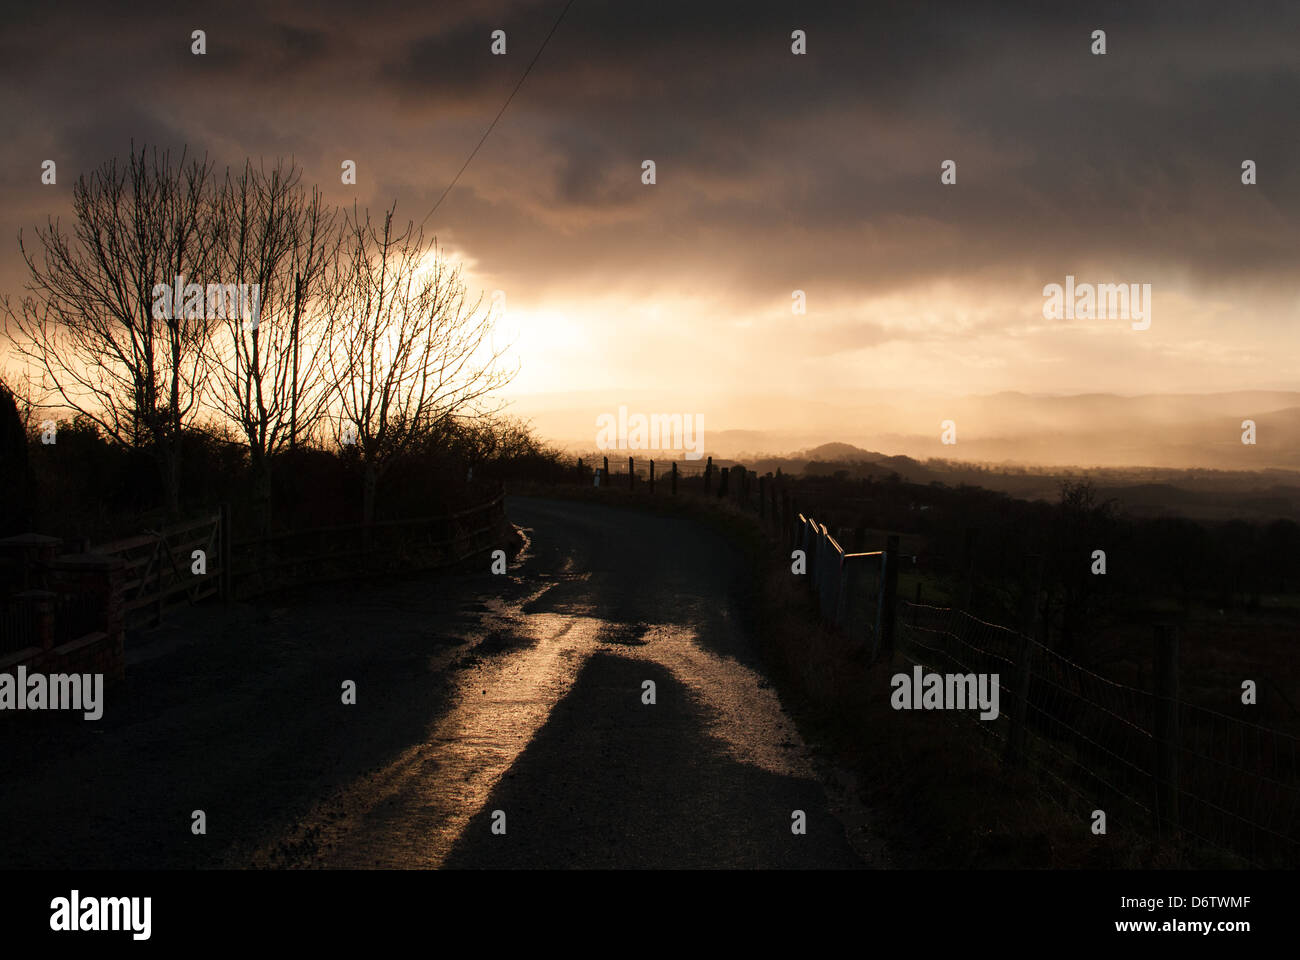 A misty golden sunset looking down the road from Clee Hill, Shropshire, England. Stock Photo